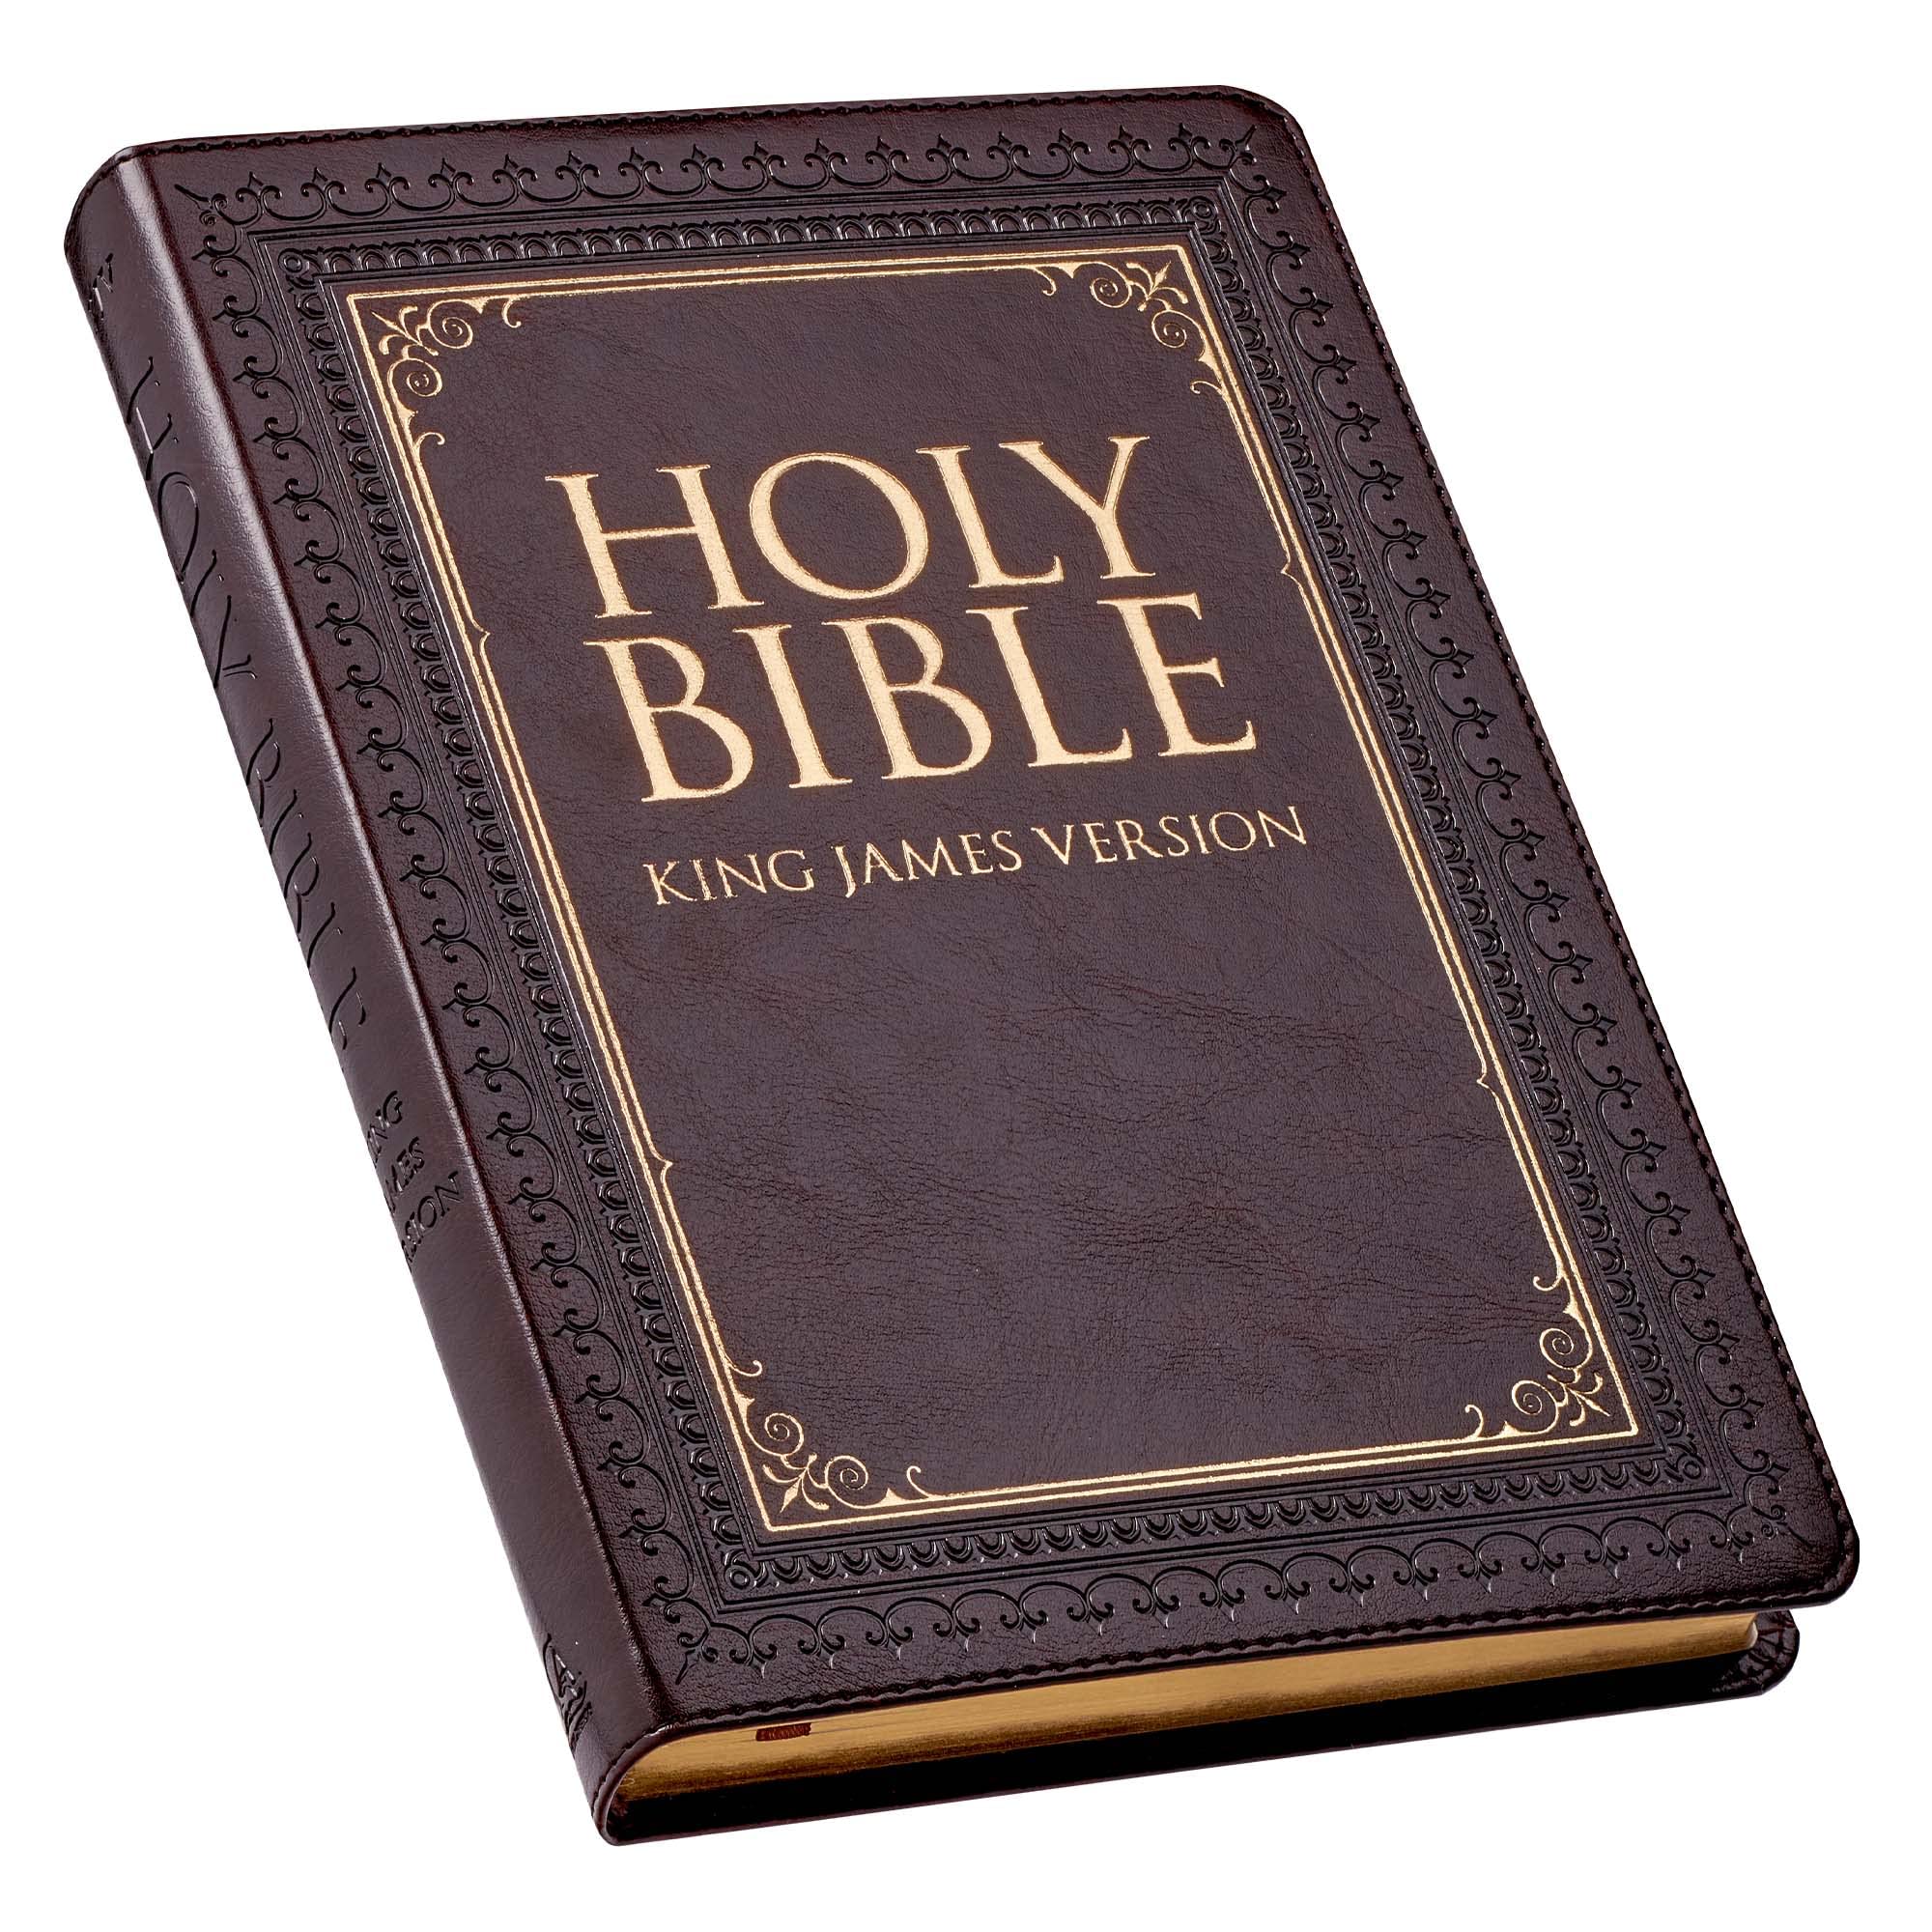 KJV Holy Bible, Thinline Large Print Faux Leather Red Letter Edition - Thumb Index & Ribbon Marker, King James Version, Dark Brown